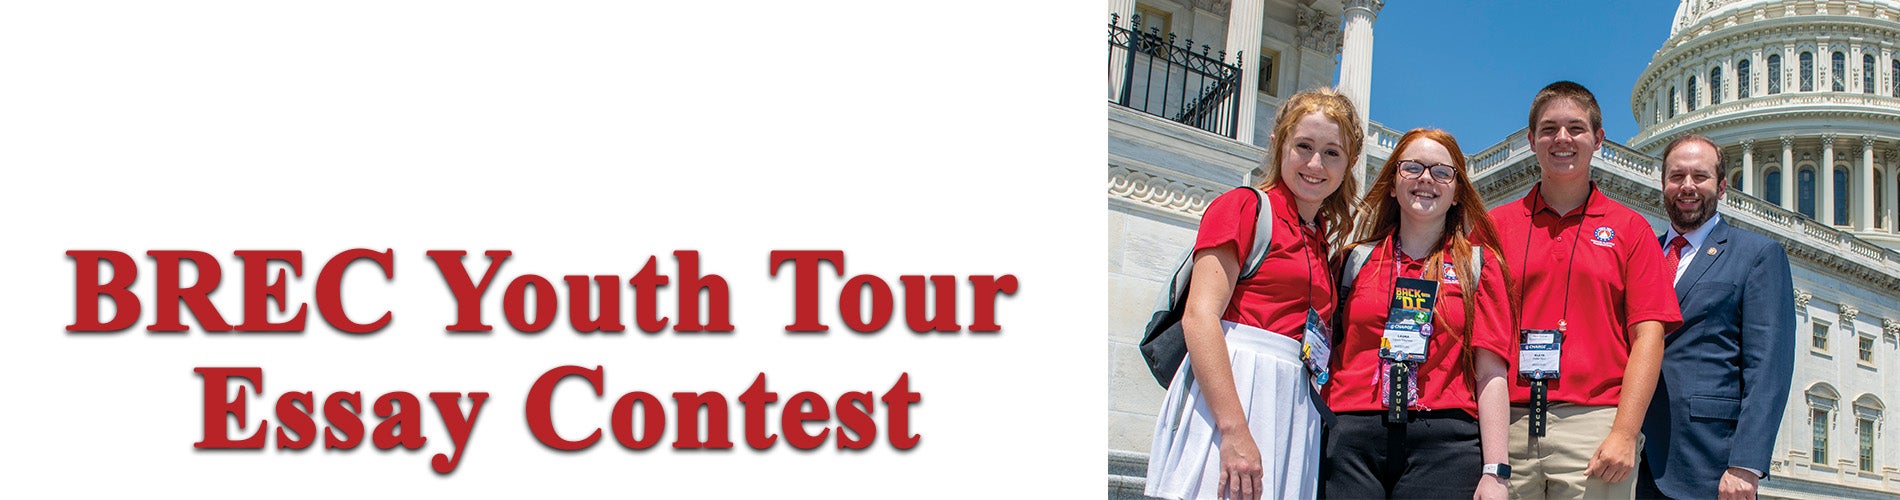 Youth Tour Essay Contest 